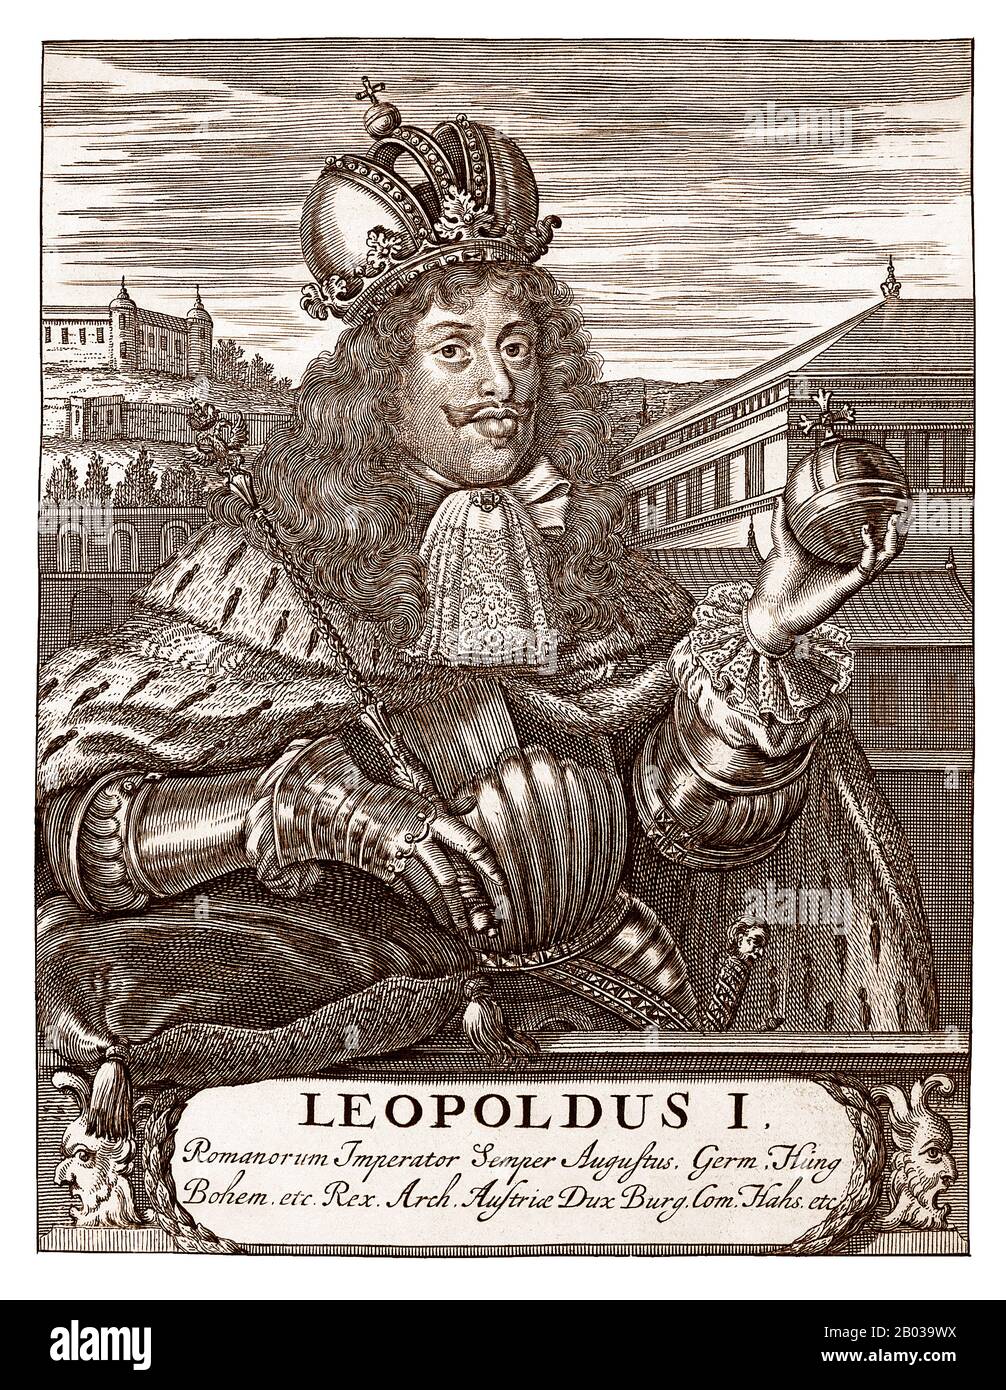 Leopold I (1640-1705) was the second son of Emperor Ferdinand III, and became heir apparent after the death of his older brother, Ferdinand IV. He was elected Holy Roman Emperor in 1658 after his father's death, and by then had also already become Archduke of Austria and claimed the crowns of Germany, Croatia, Bohemia and Hungary. Stock Photo